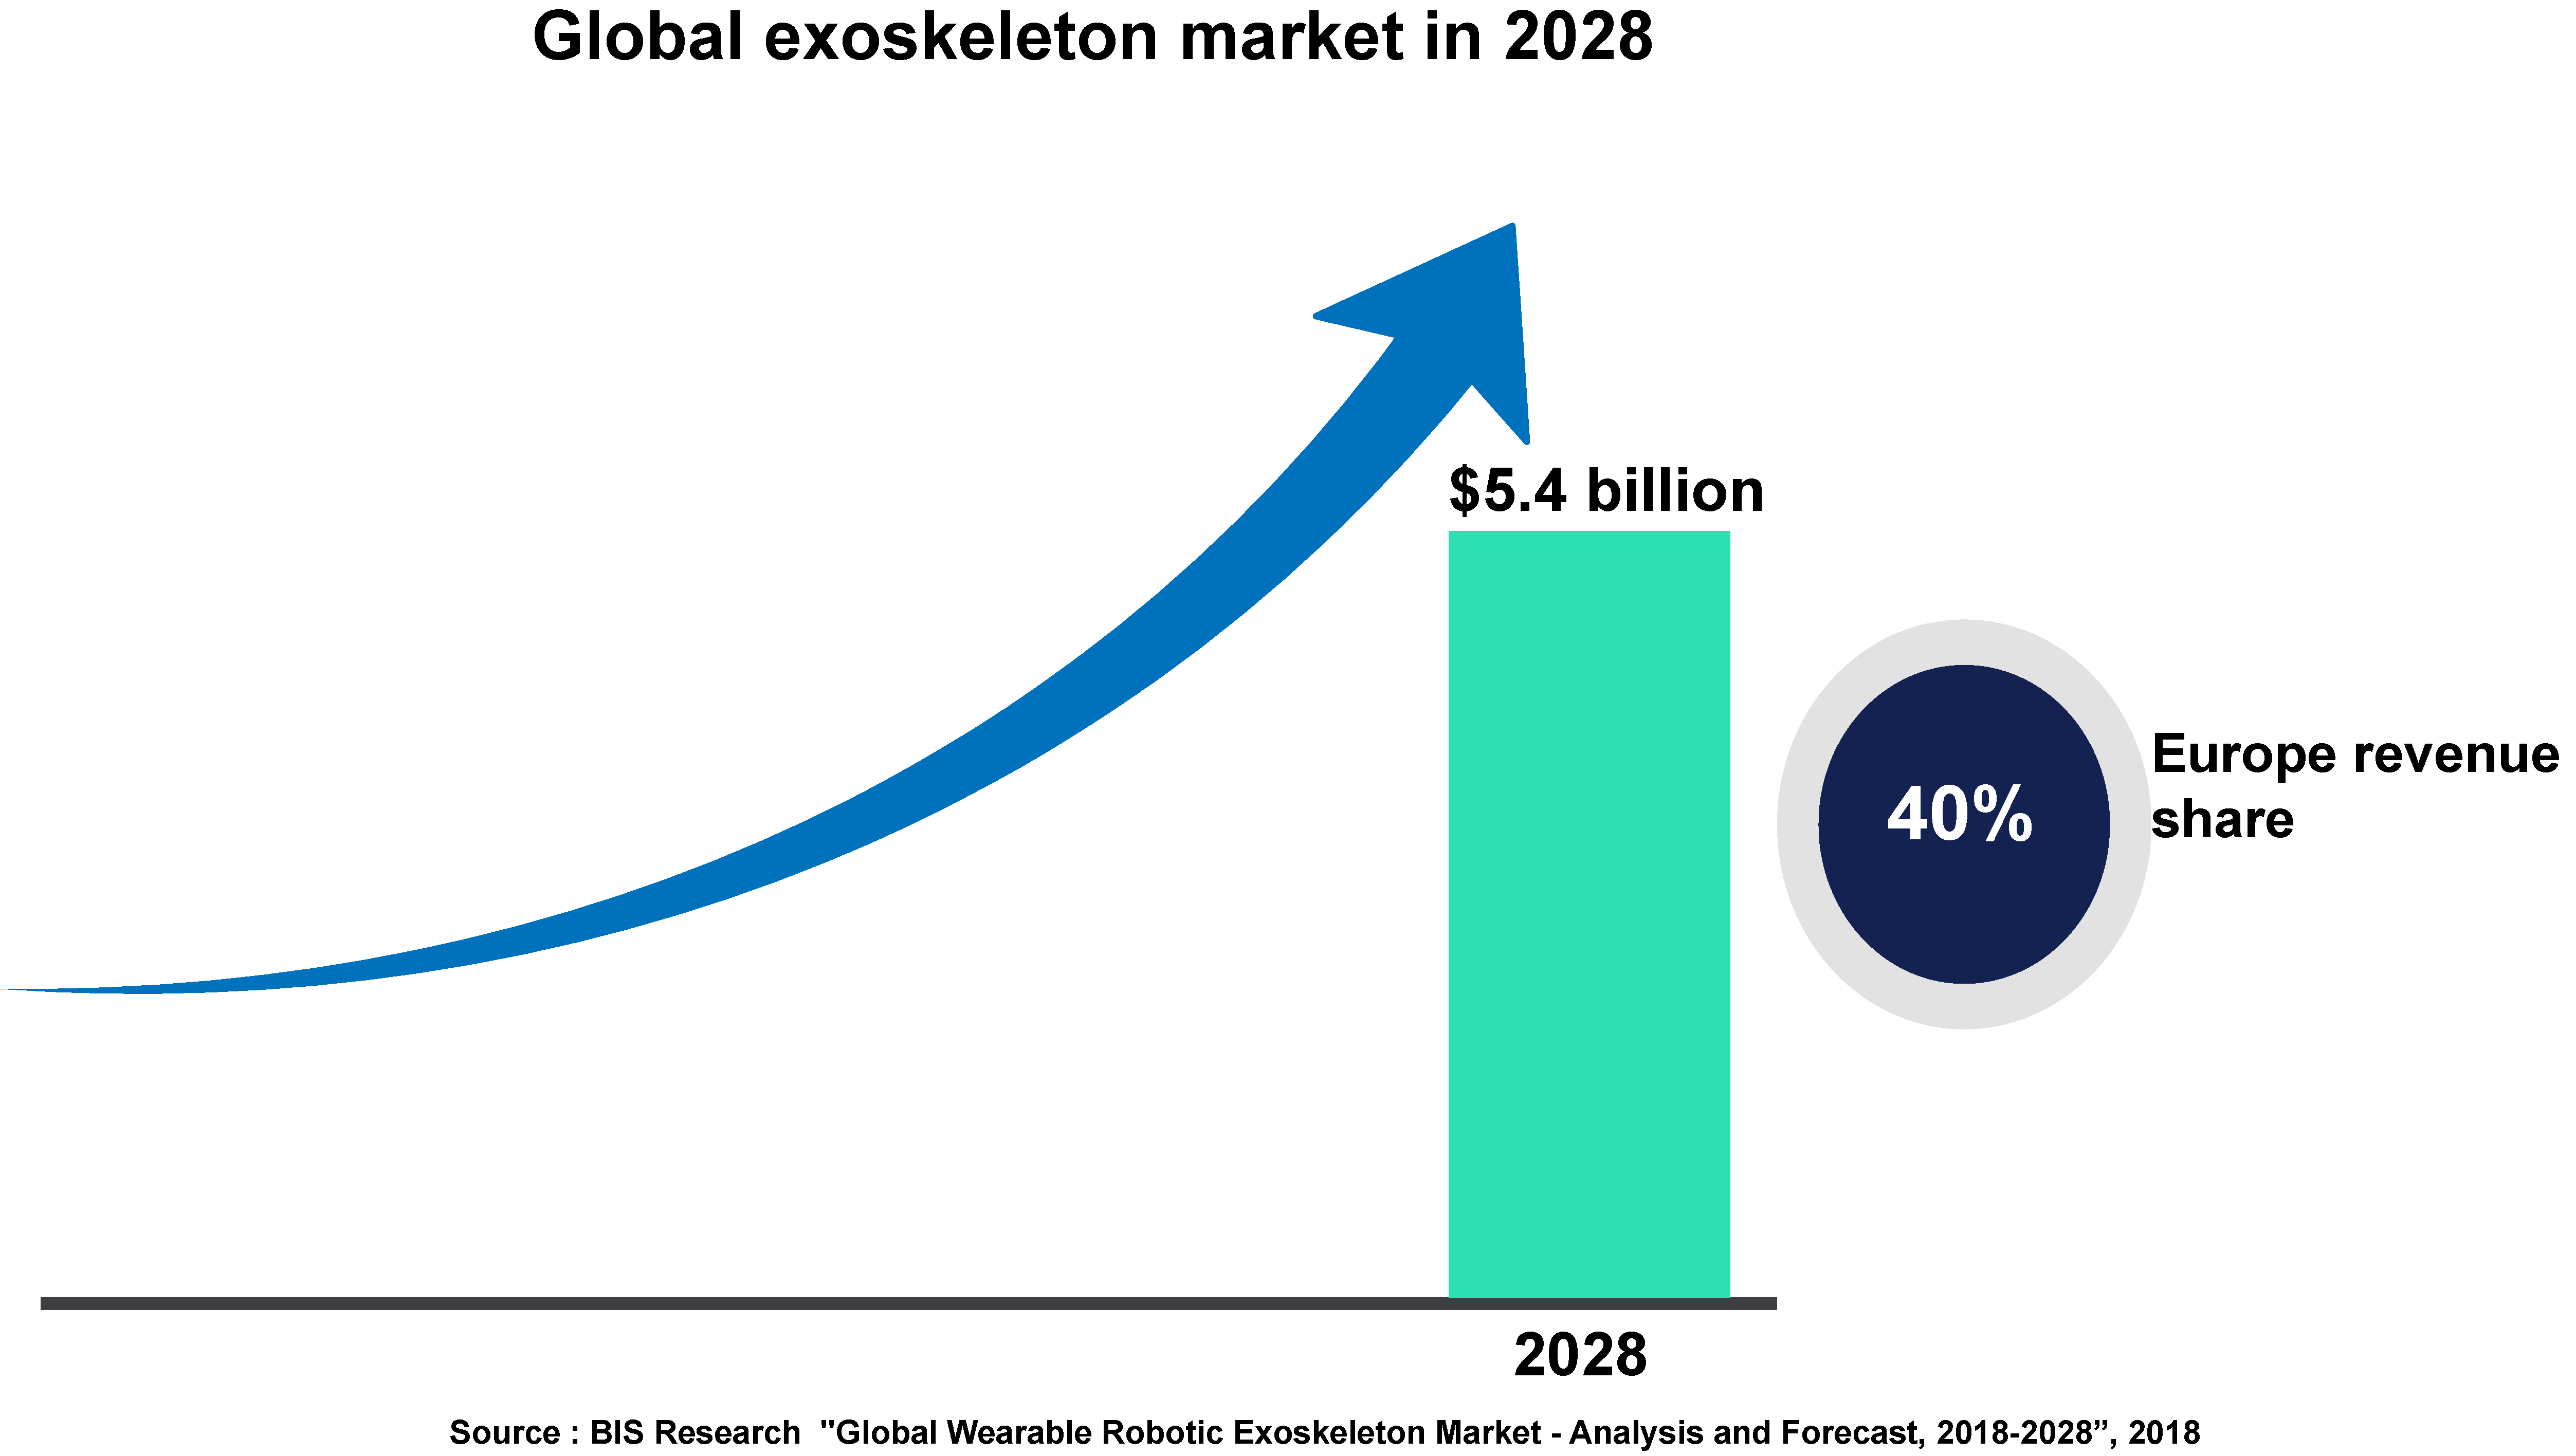 Graph showing the expected value of the global exoskeleton market in 2028